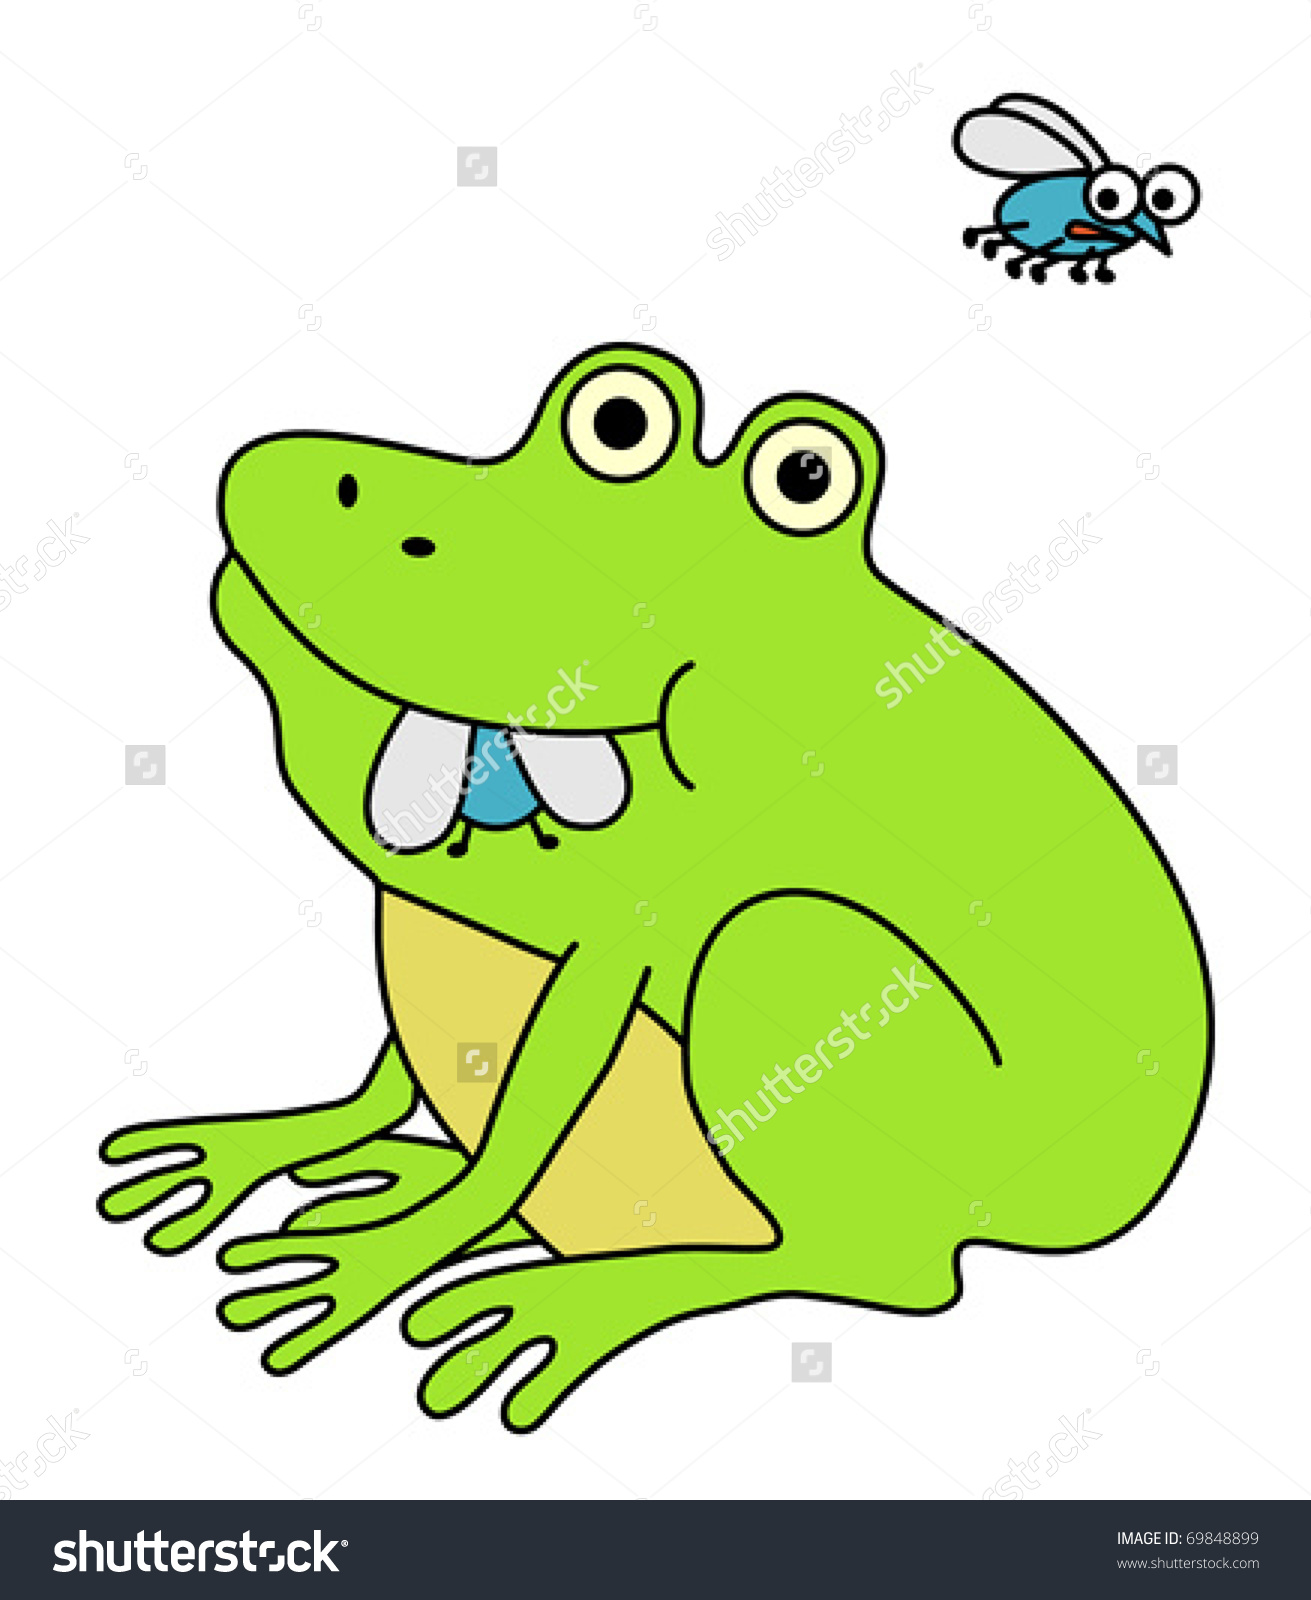 Frog eating fly clipart.